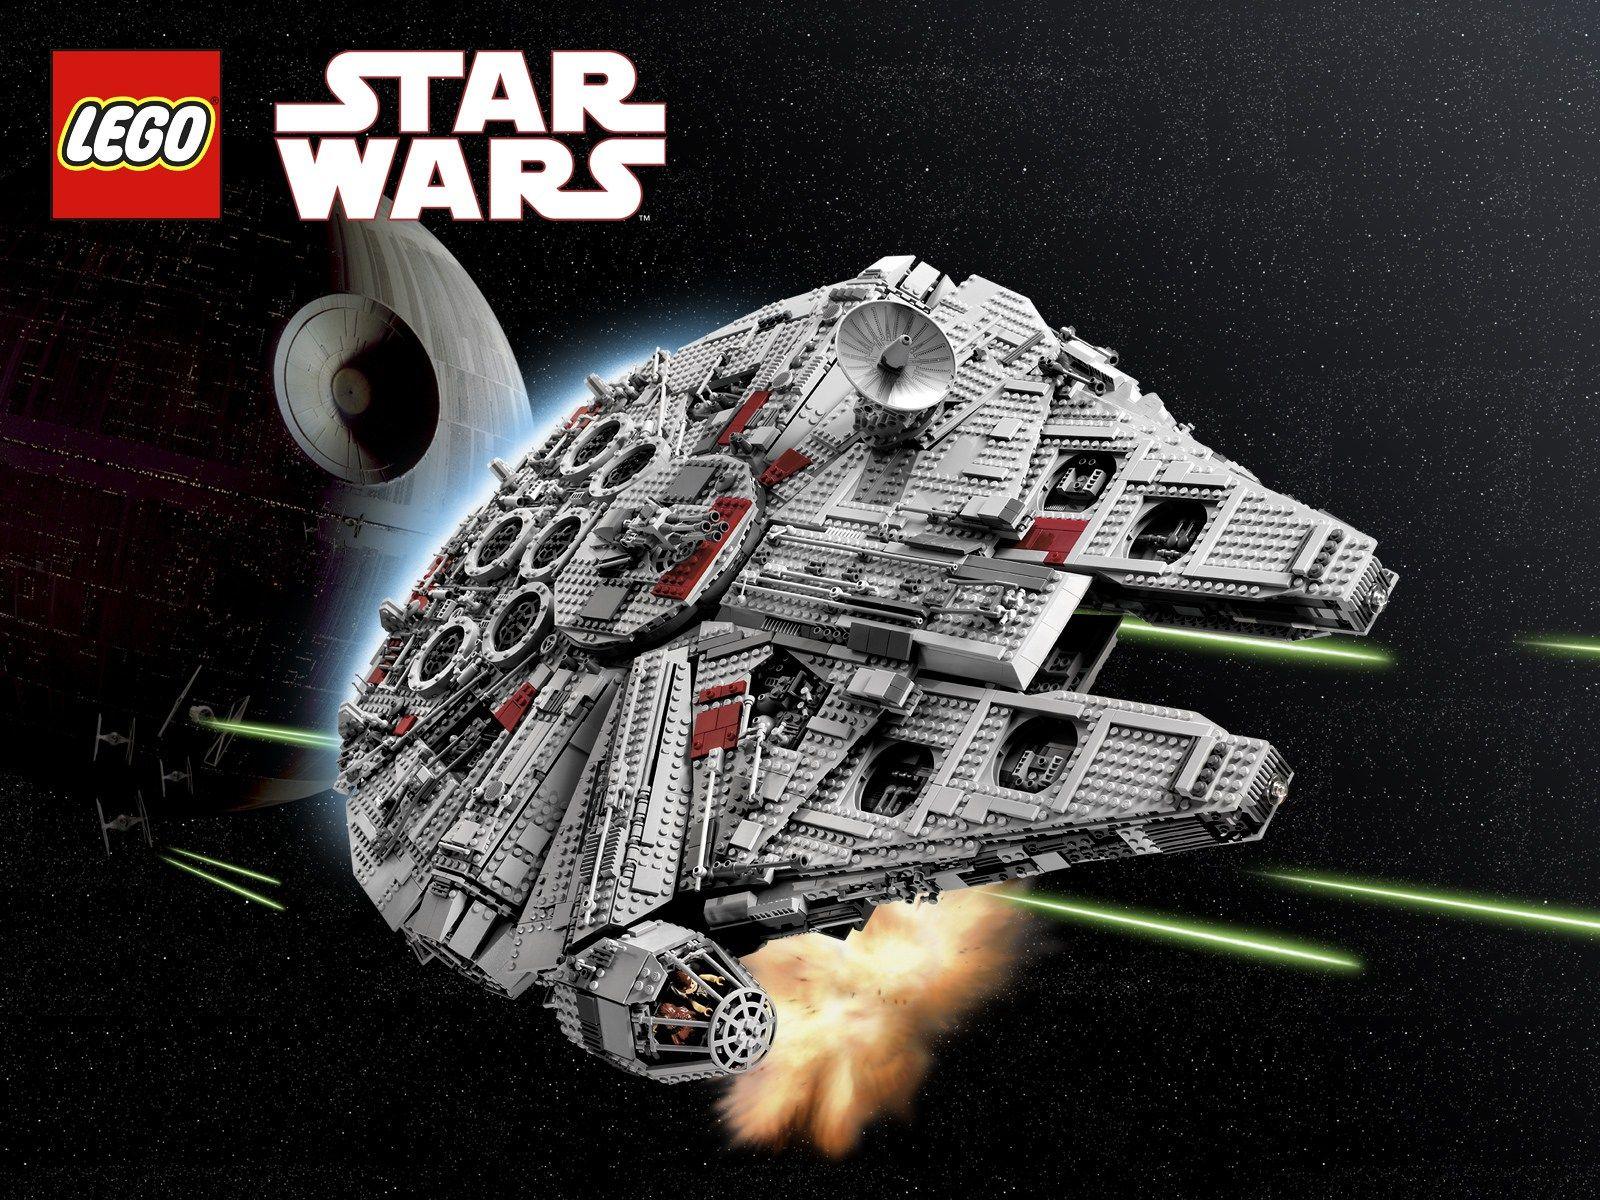 Lego Star Wars is Taking Over the Galaxy